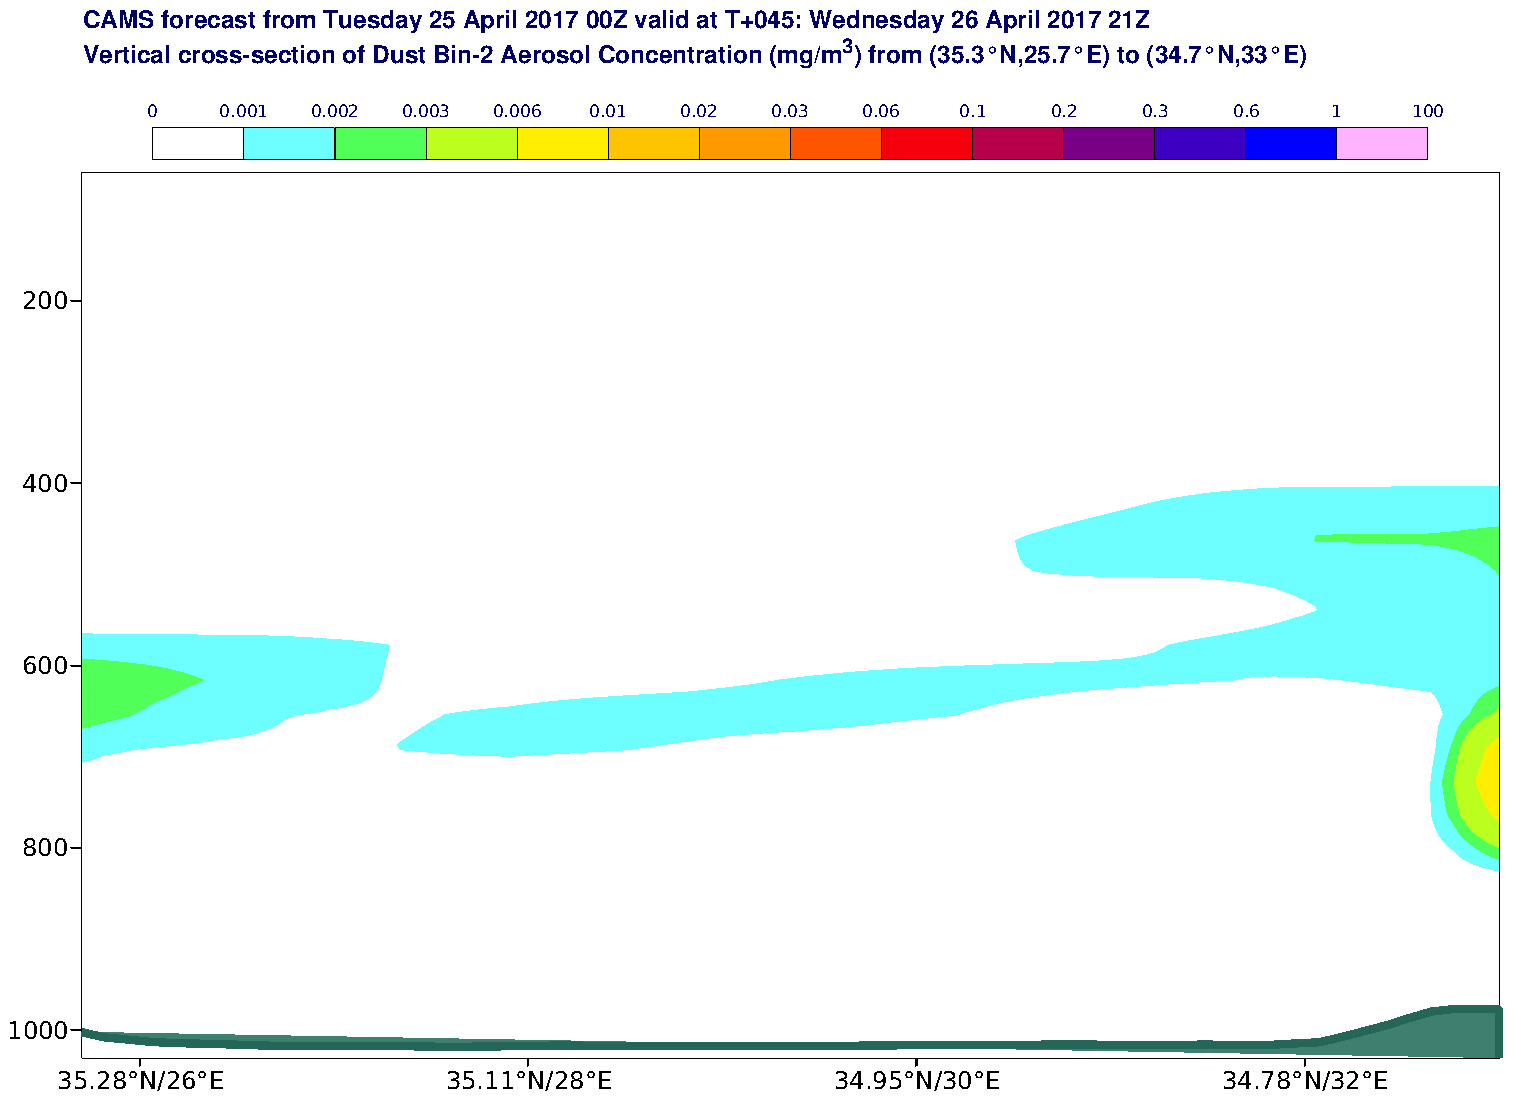 Vertical cross-section of Dust Bin-2 Aerosol Concentration (mg/m3) valid at T45 - 2017-04-26 21:00